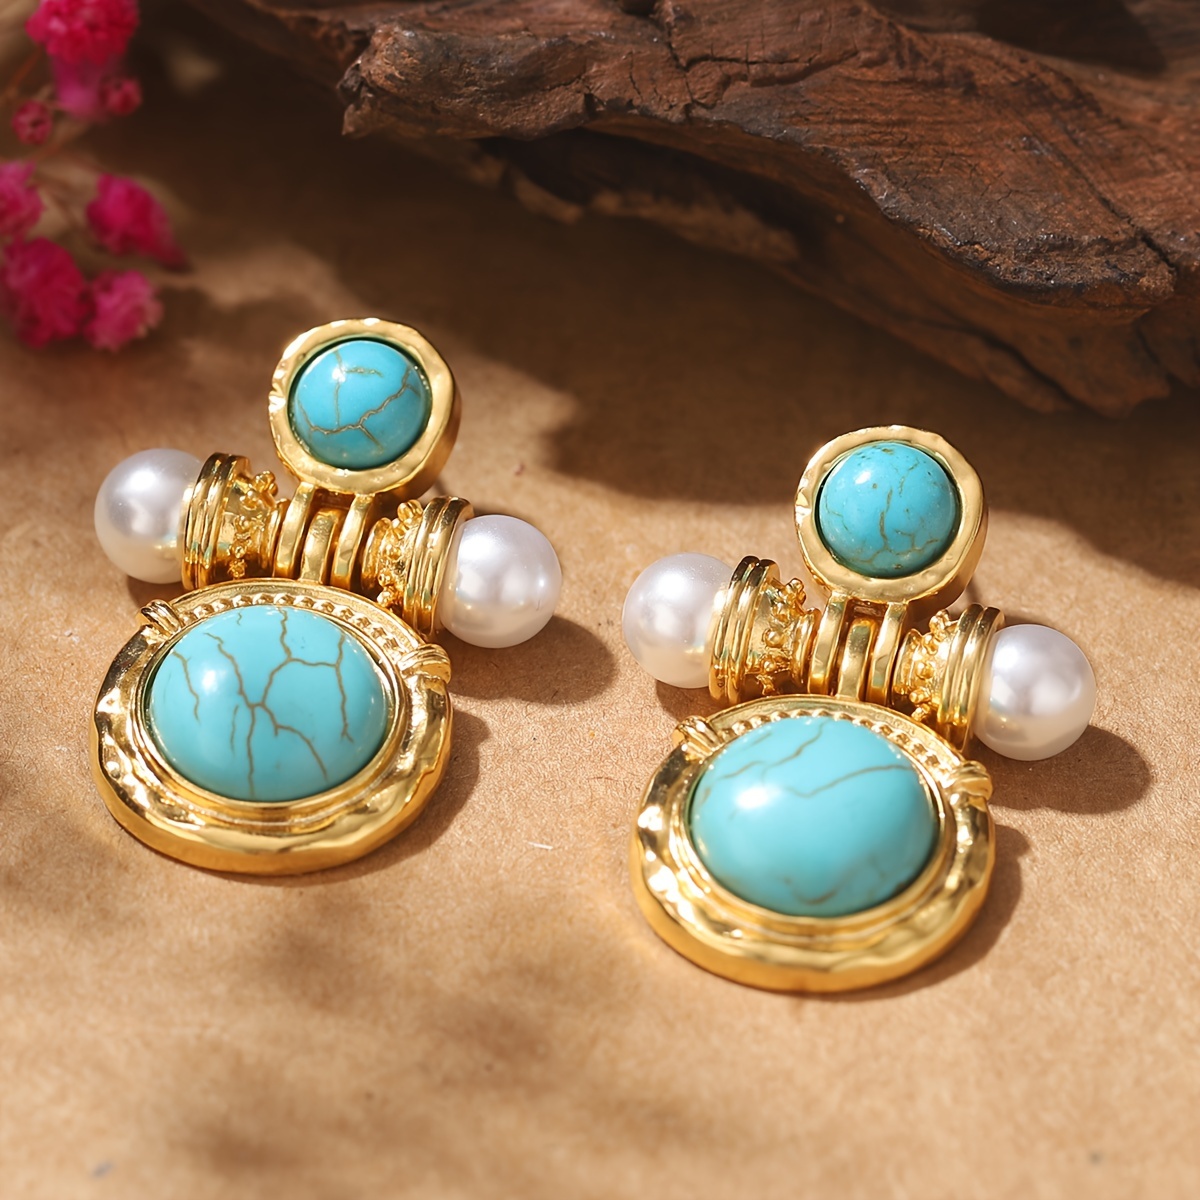 

Vintage Boho Turquoise Pearl Earrings: Plated, Alloy Base, Silver Earwires, Suitable For Daily Wear And Parties